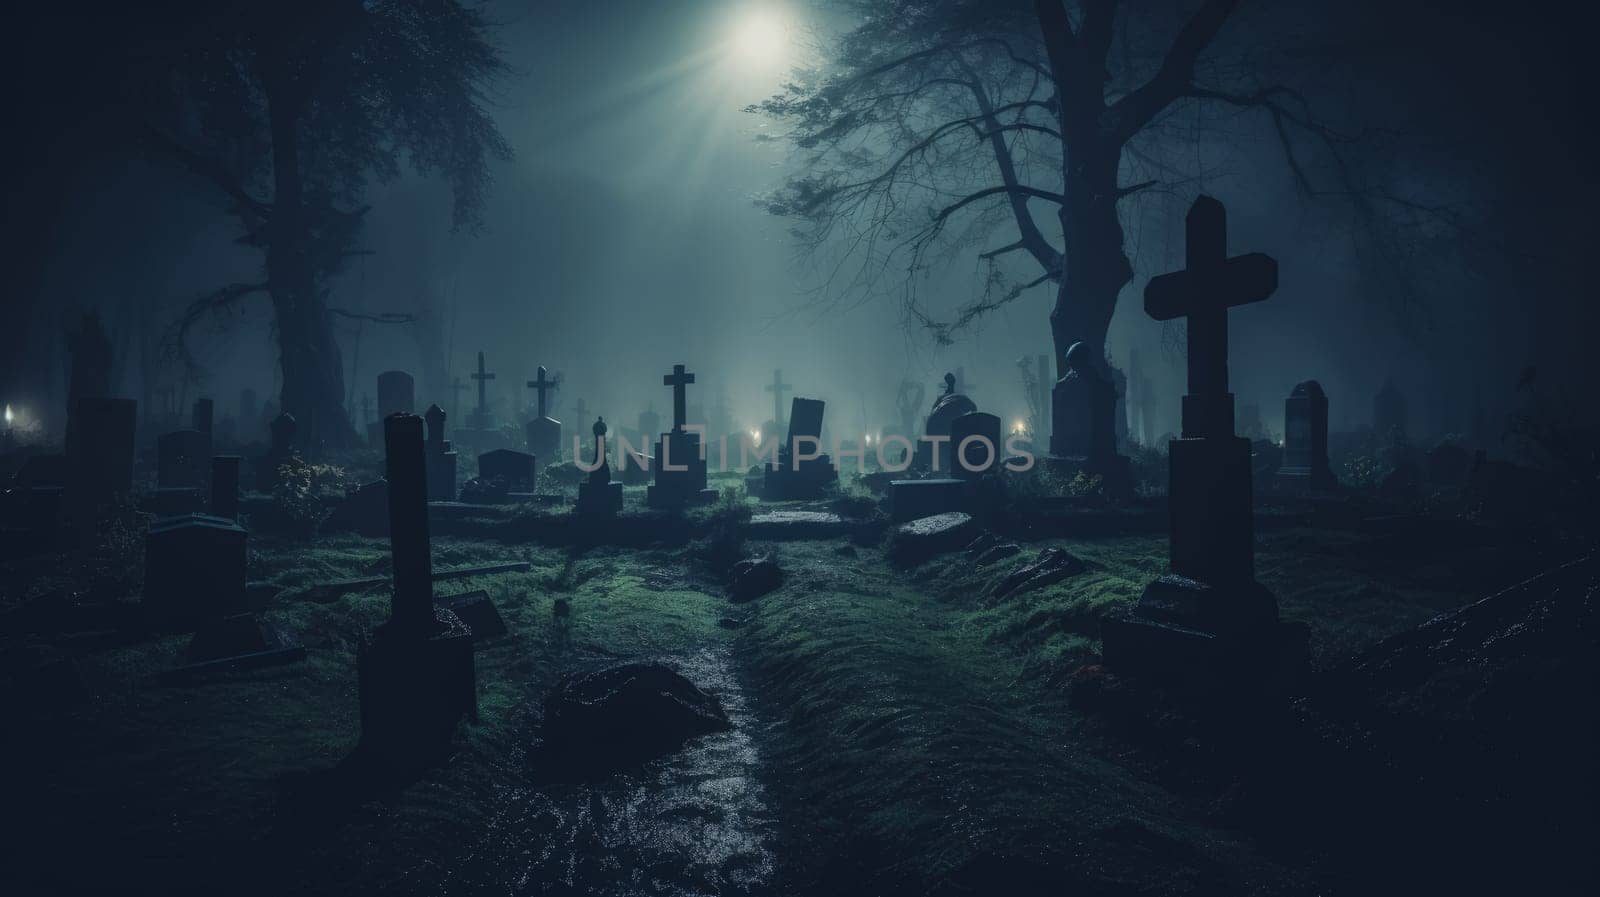 Cemetery with darksynth vibe, the scene capturing the eerie and atmospheric nature of the graveyard under lights